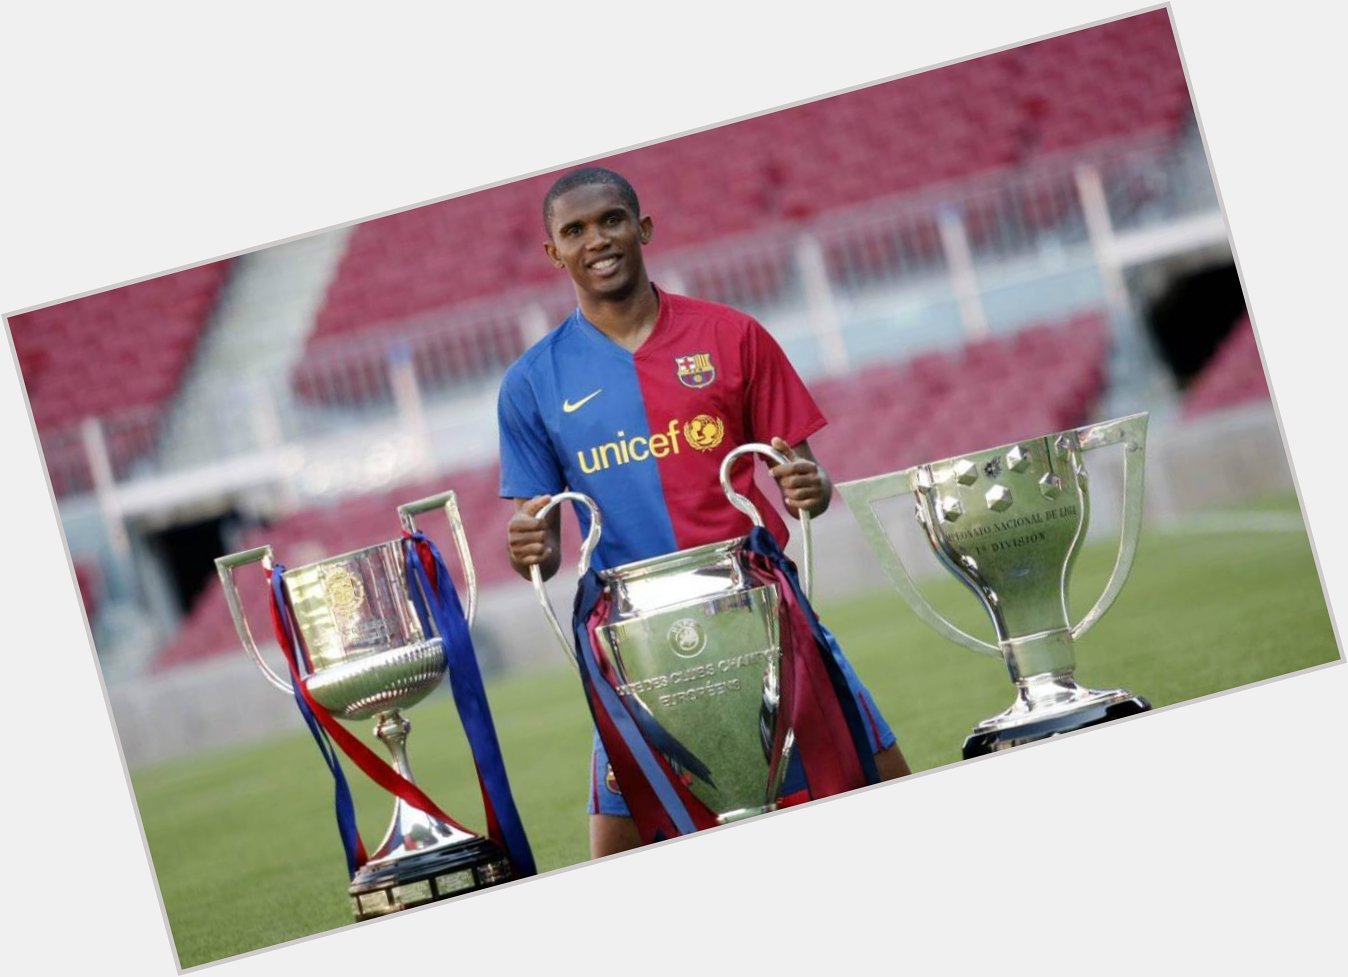  | Happy birthday, Samuel Eto o, one of the greatest number 9 ever.

Thank you legend. 